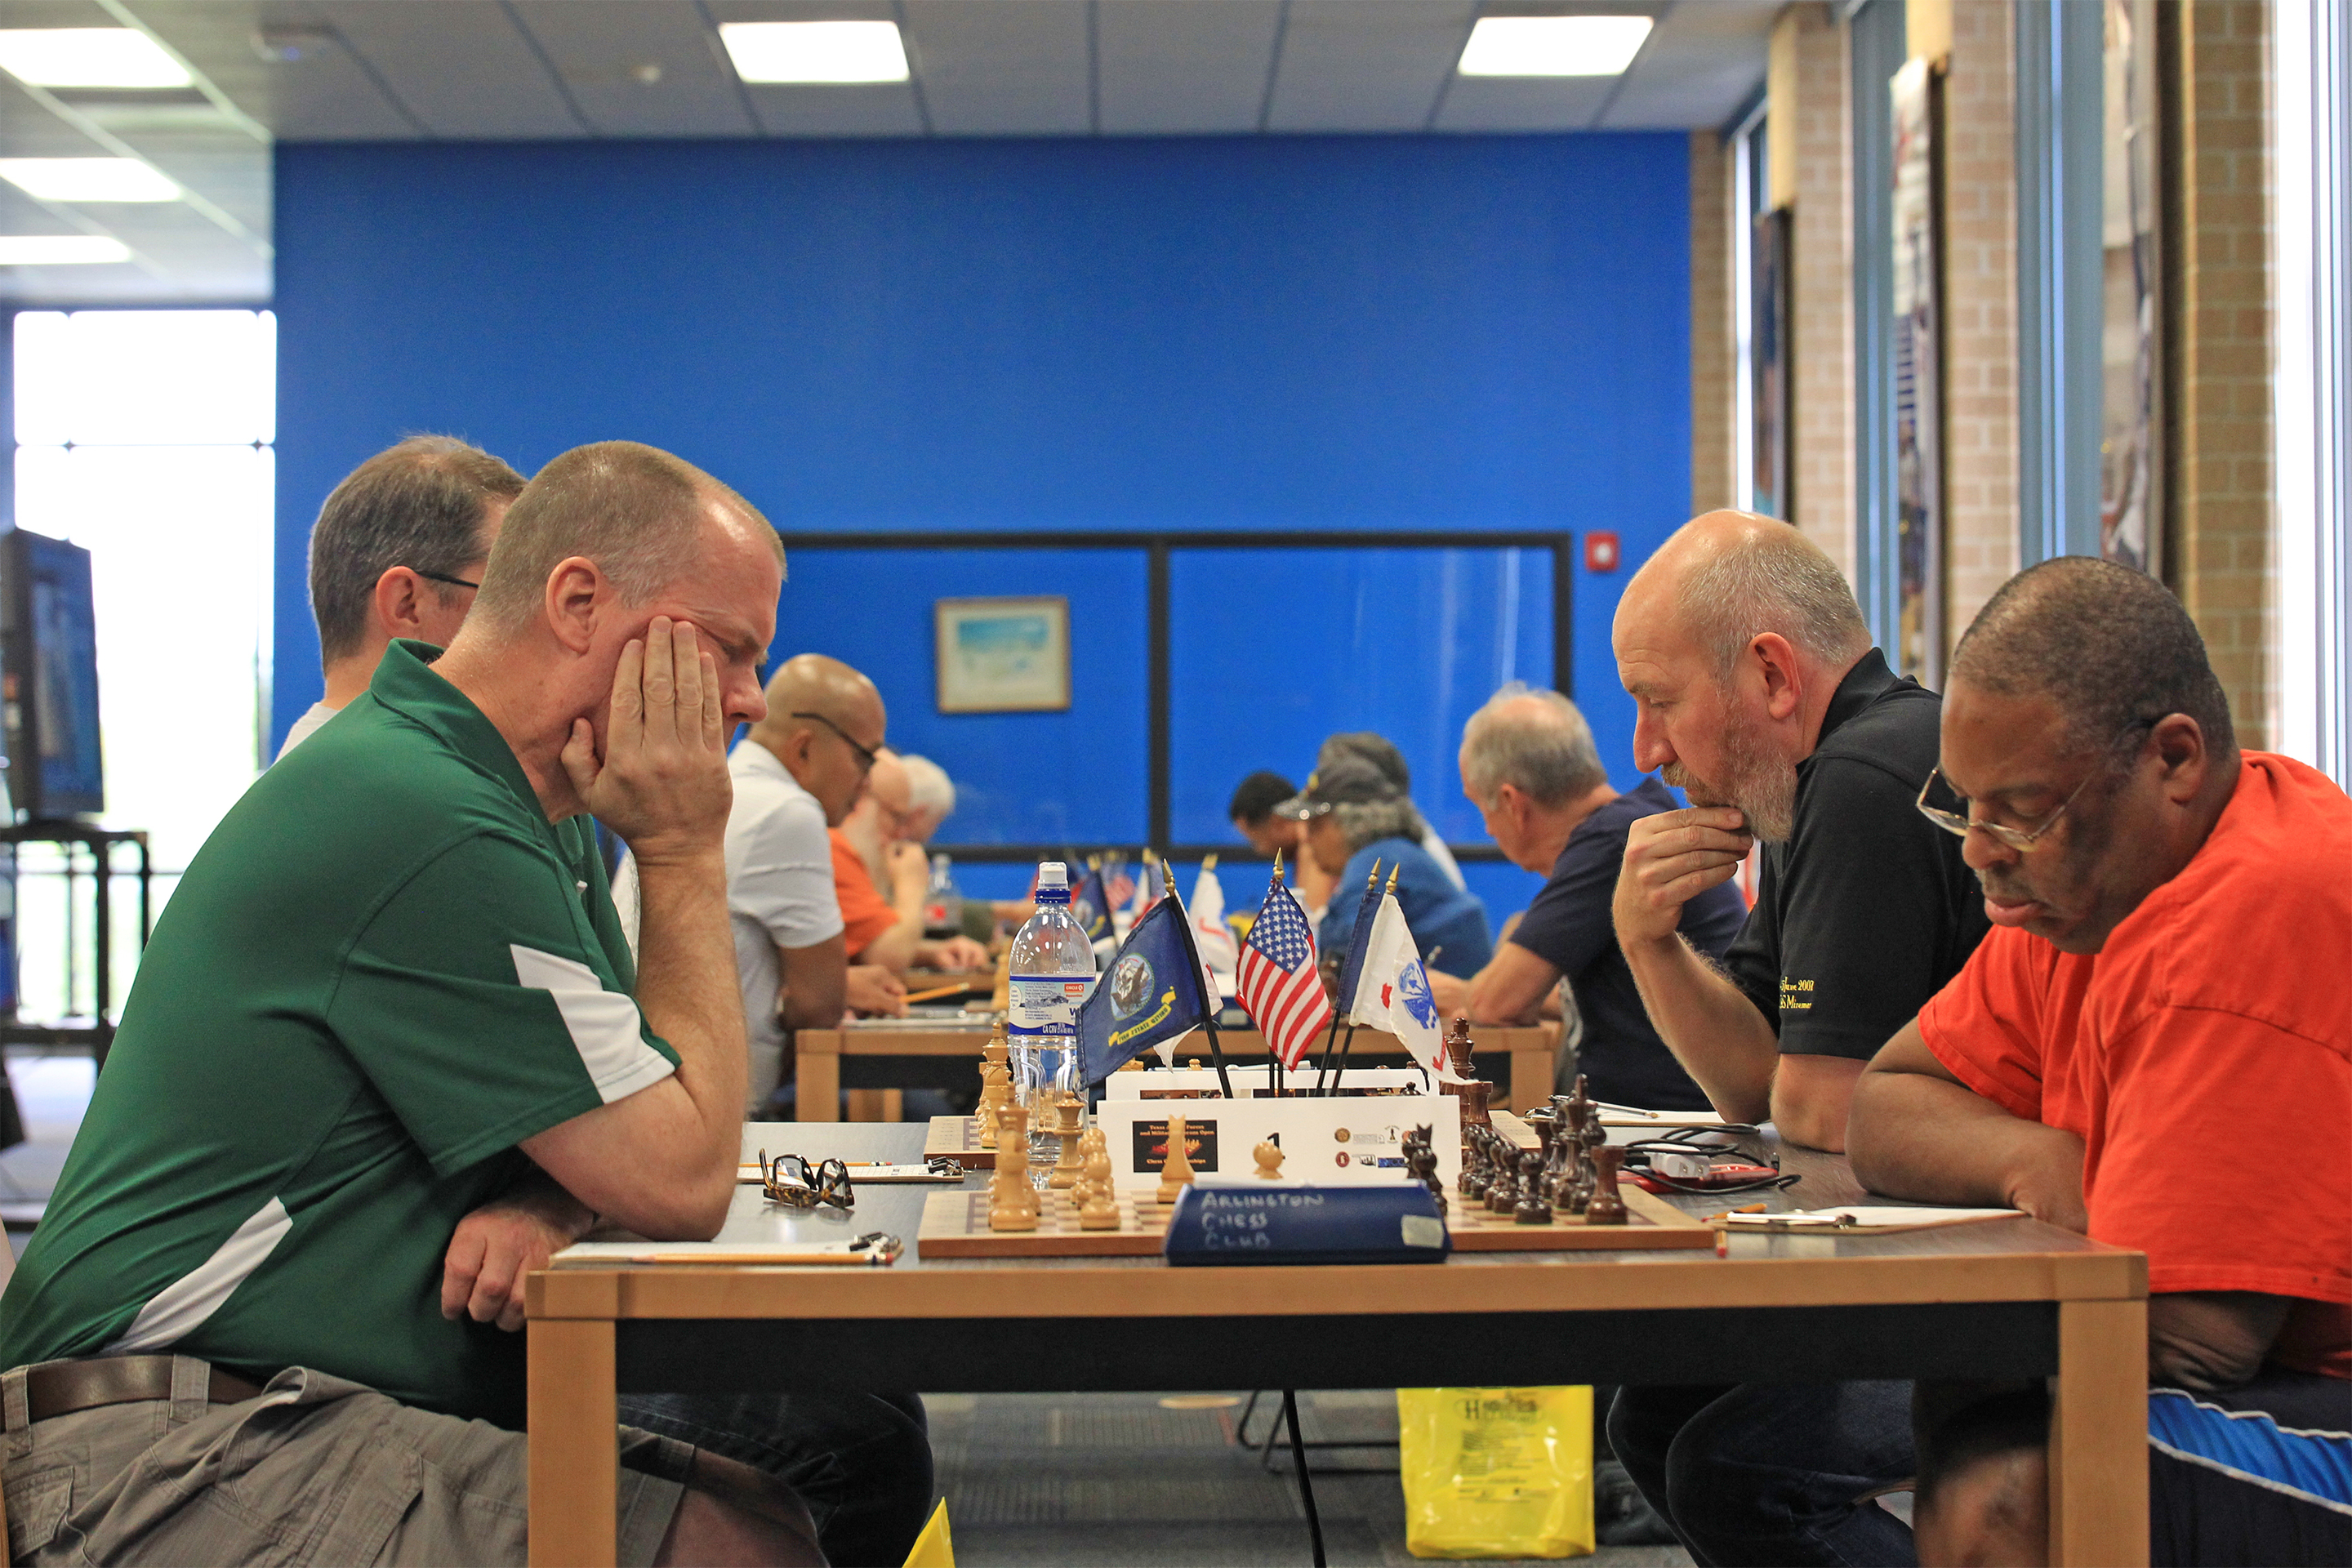 Round One and Board One (closest).  Chess Expert Ron Farrar (left wearing green) and Leon Toliver (right wearing orange).  On Board Two (behind Leon Toliver) is Chess Expert David Hater (wearing black).  Photo by Sheri Hemrick.